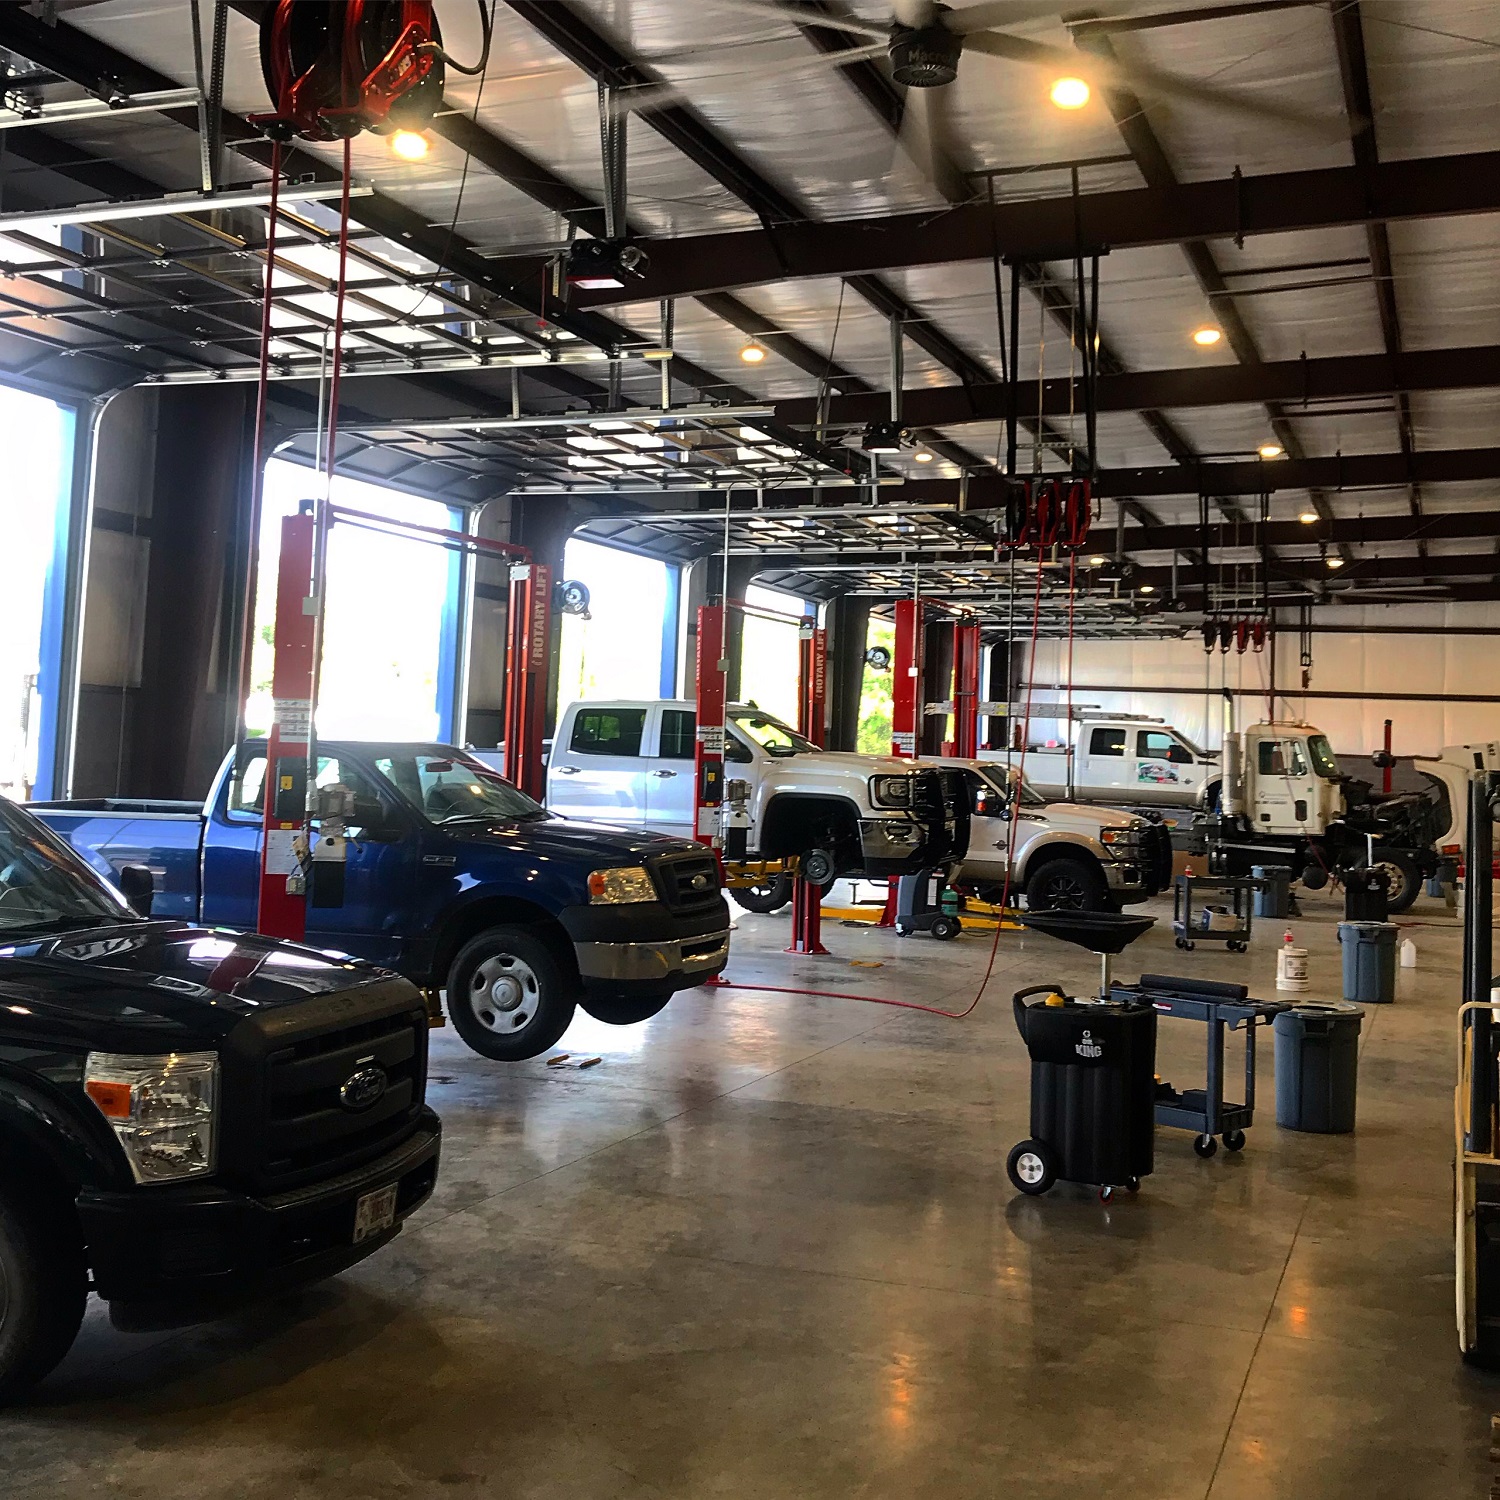 Commercial Vehicle Repairs Available at Complete Tire & Service in Columbus, GA 31901, Opelika, AL 36804 and Columbus, GA 31903